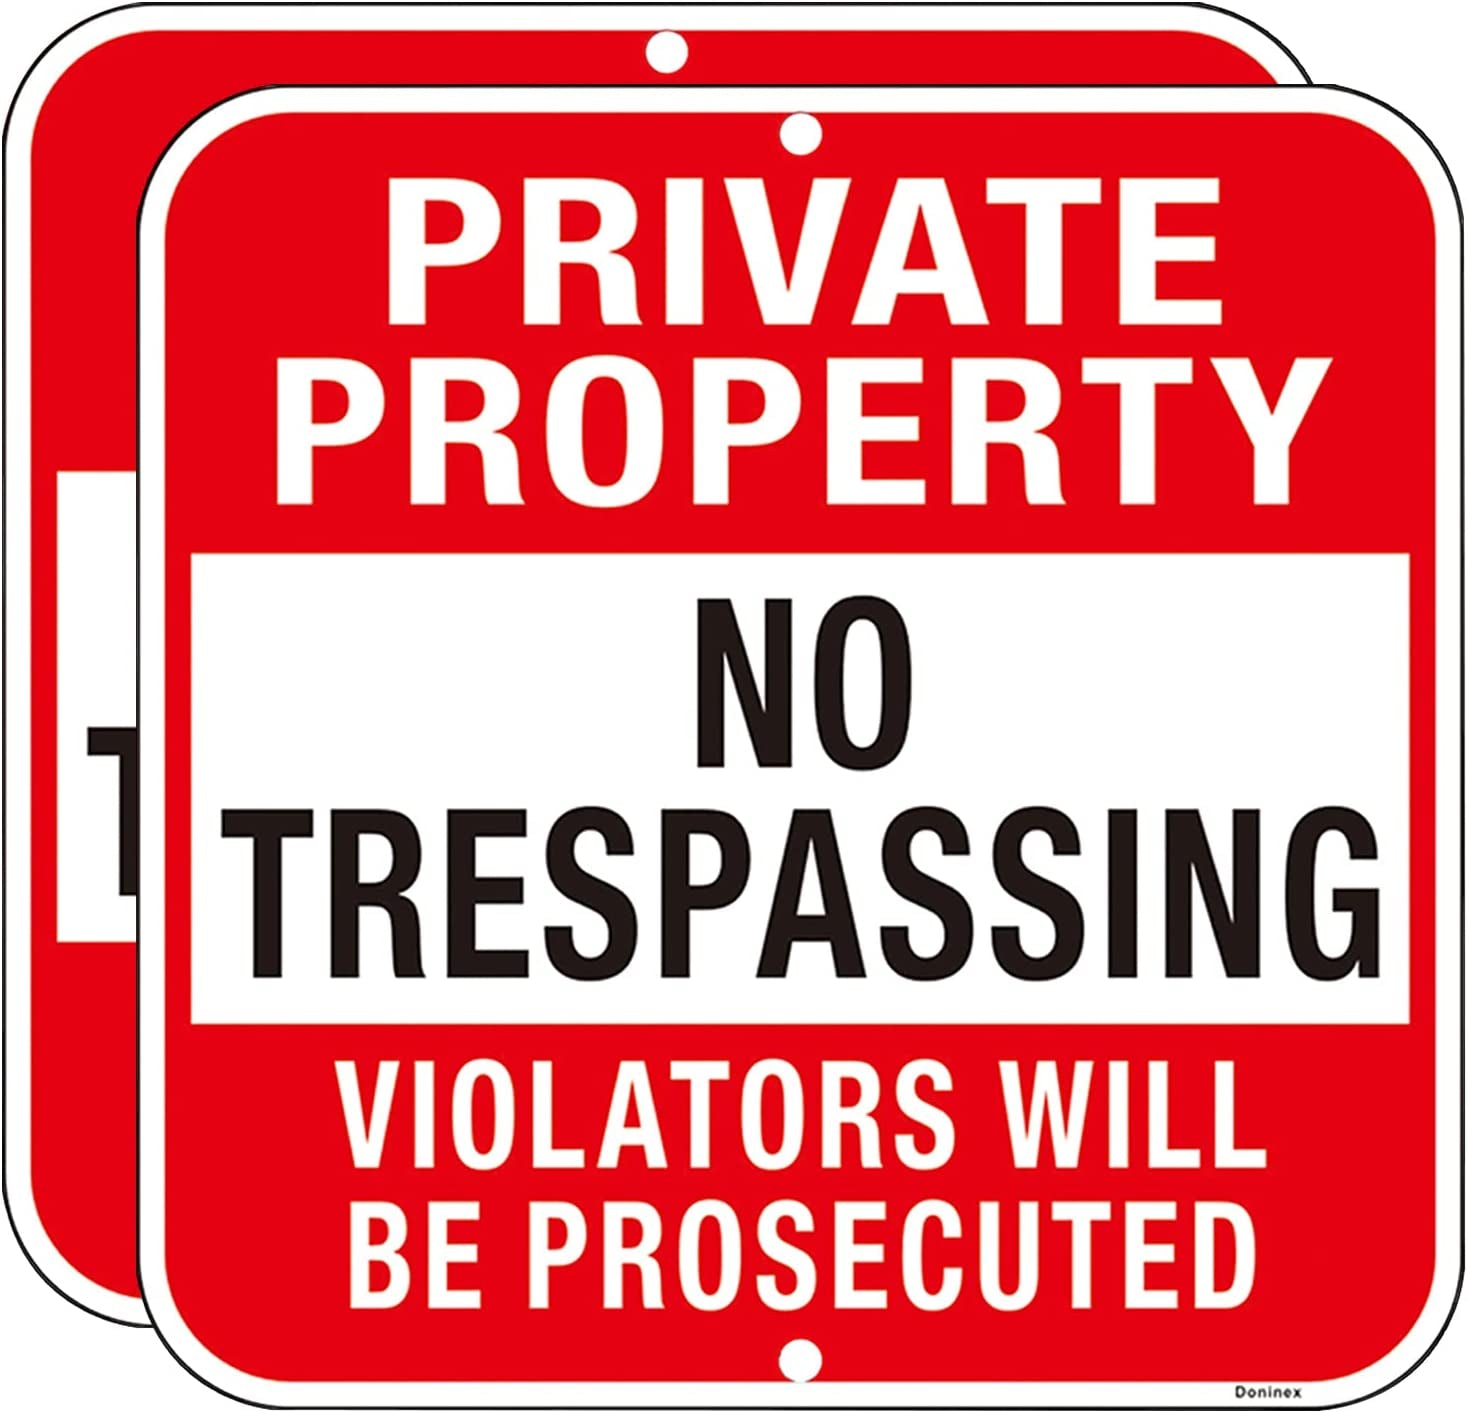 Doninex, Large (2 Pack) Private Property No Trespassing Sign, 12X12 Inches Metal Heavy Duty Reflective Aluminum, Violators Will Be Prosecuted Signs, Weather Resistant, Waterproof, Weatherproof, Indoor or Outdoor Use